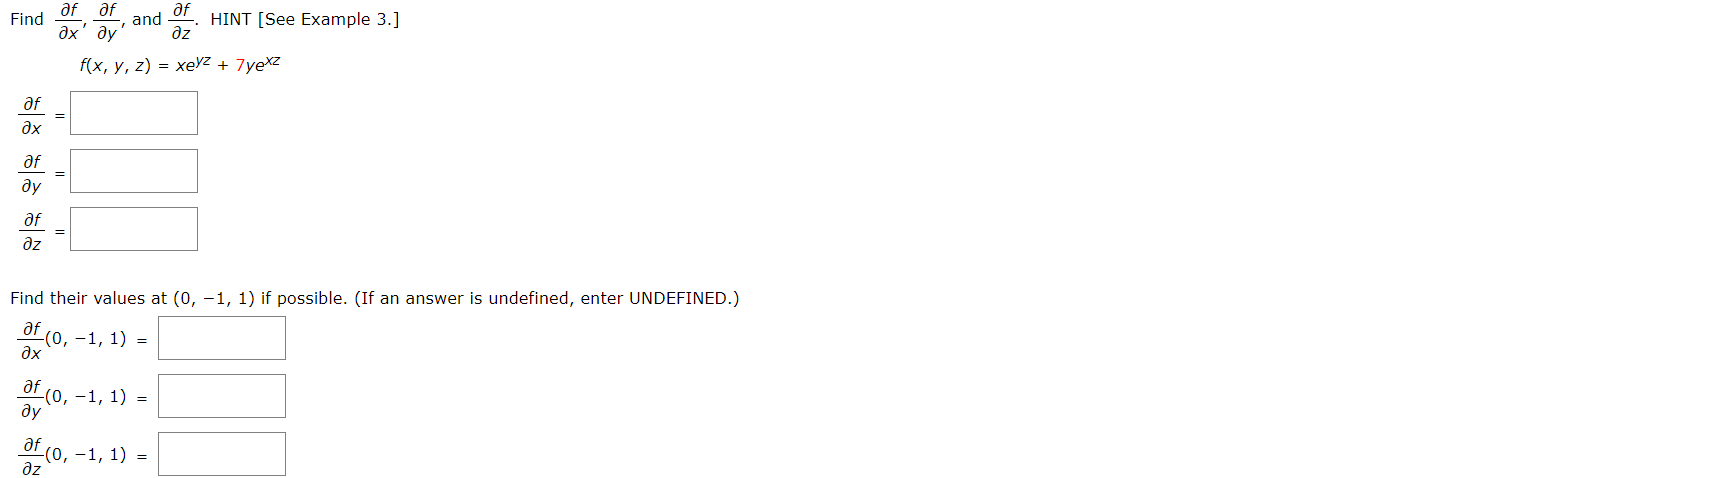 af af
af
HINT [See Example 3.]
Find
and
дх ду
dz
f(x, y, z) = xeyZ + 7yexz
af
дх
af
ду
дf
дz
Find their values at (0, -1, 1) if possible. (If an answer is undefined, enter UNDEFINED.)
дf
(0, -1, 1) =
дх
af
(0,-1, 1) =
ду
-(0, -1, 1) =
дz
